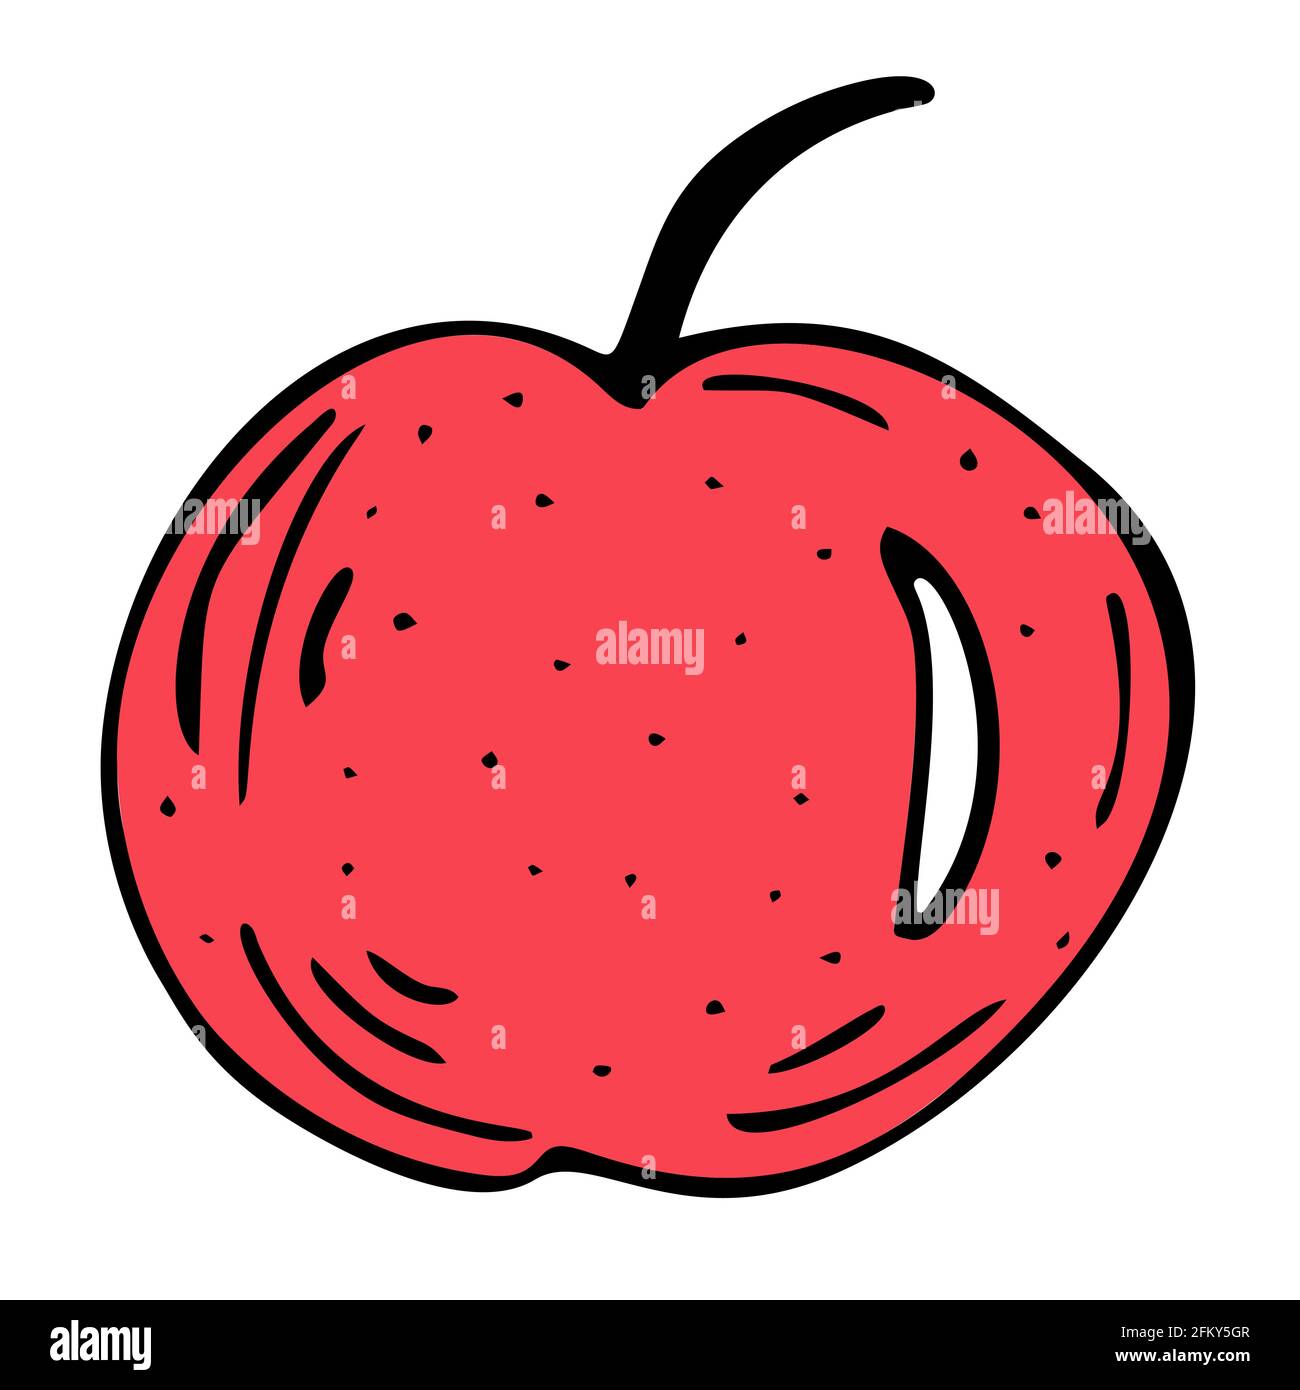 Bright and juicy apple illustration, on a white background. Stock Vector